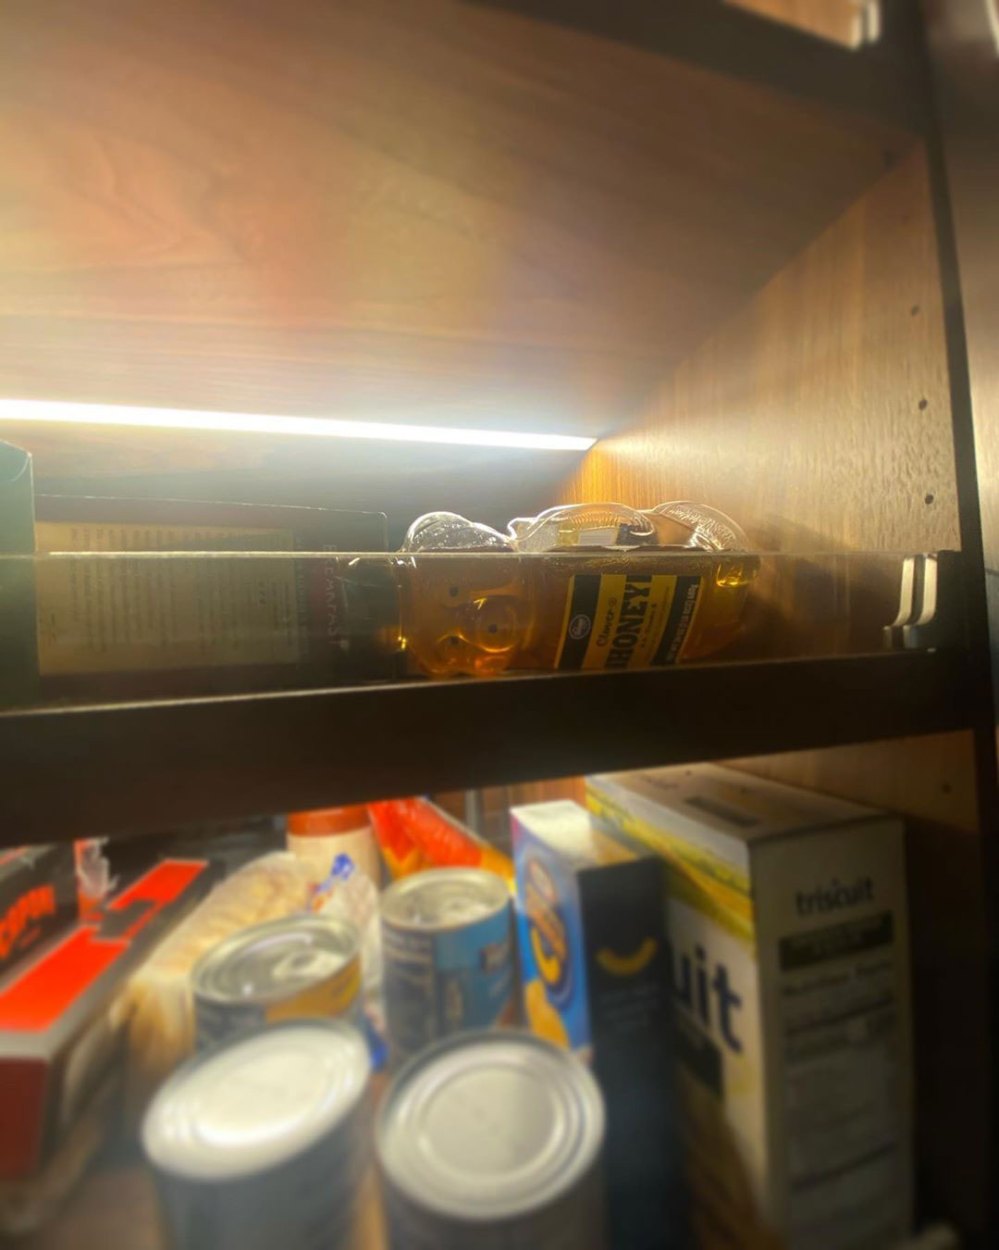 Timothee Chalamet Shares a Photo of His Pantry